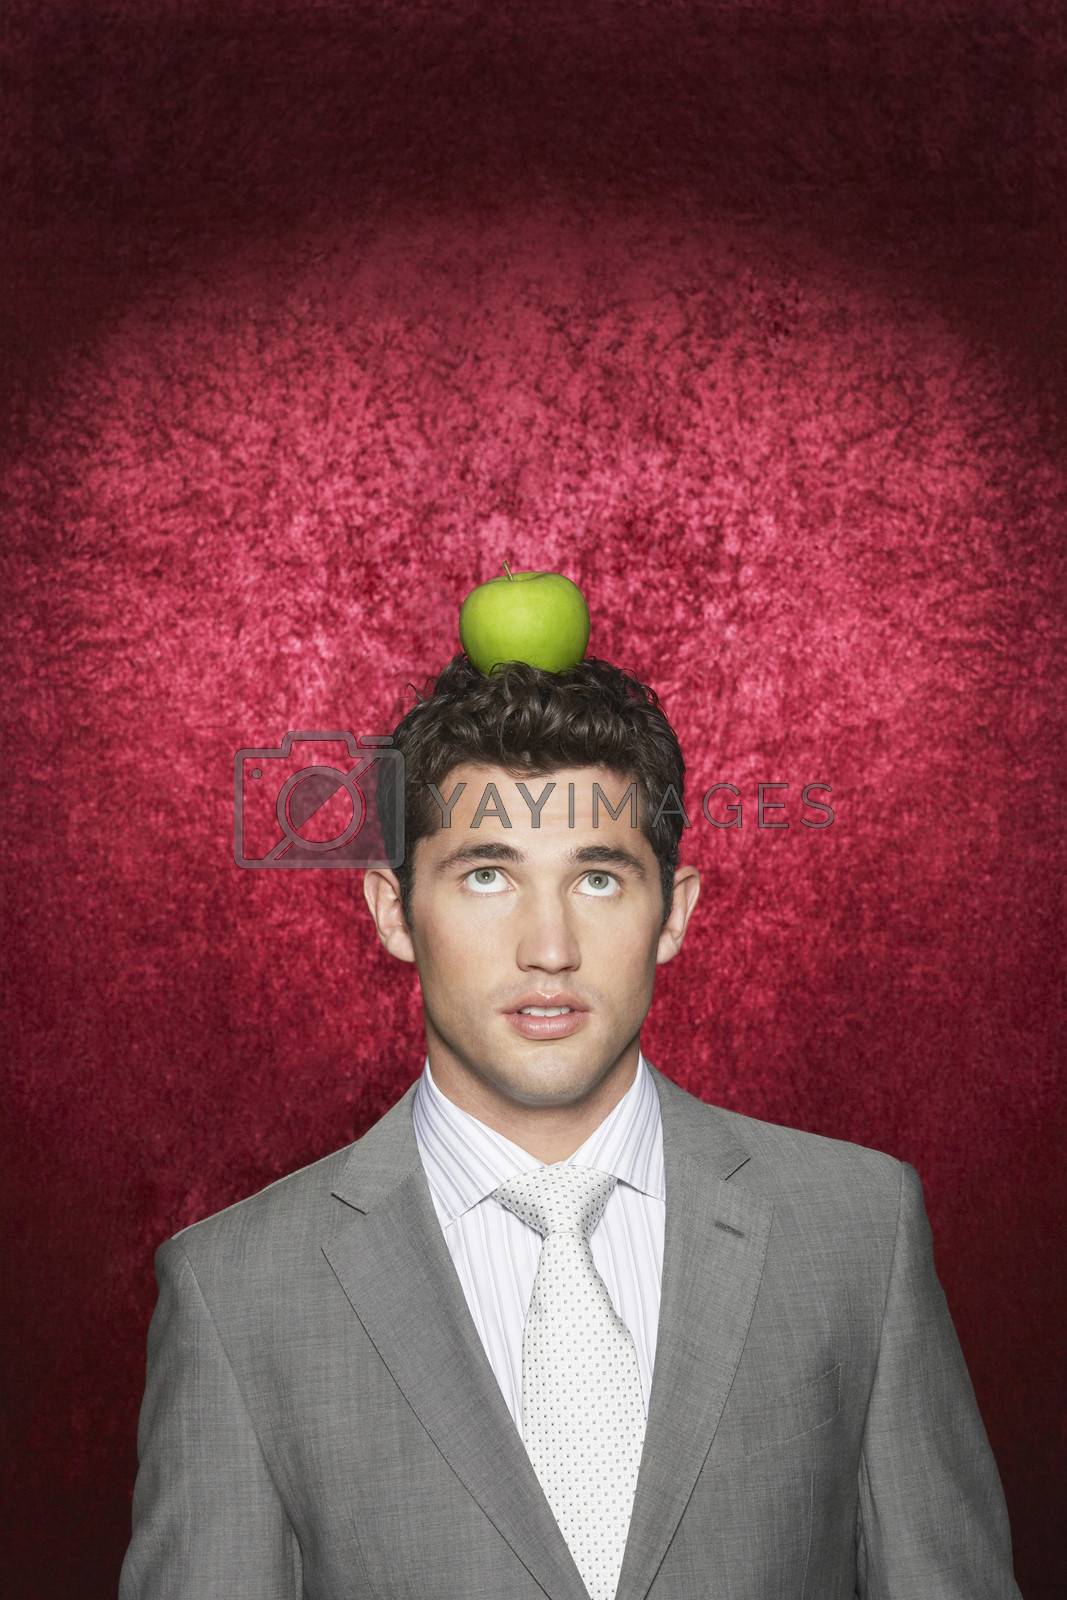 Royalty free image of Young man with apple on his head against red velvet background by moodboard